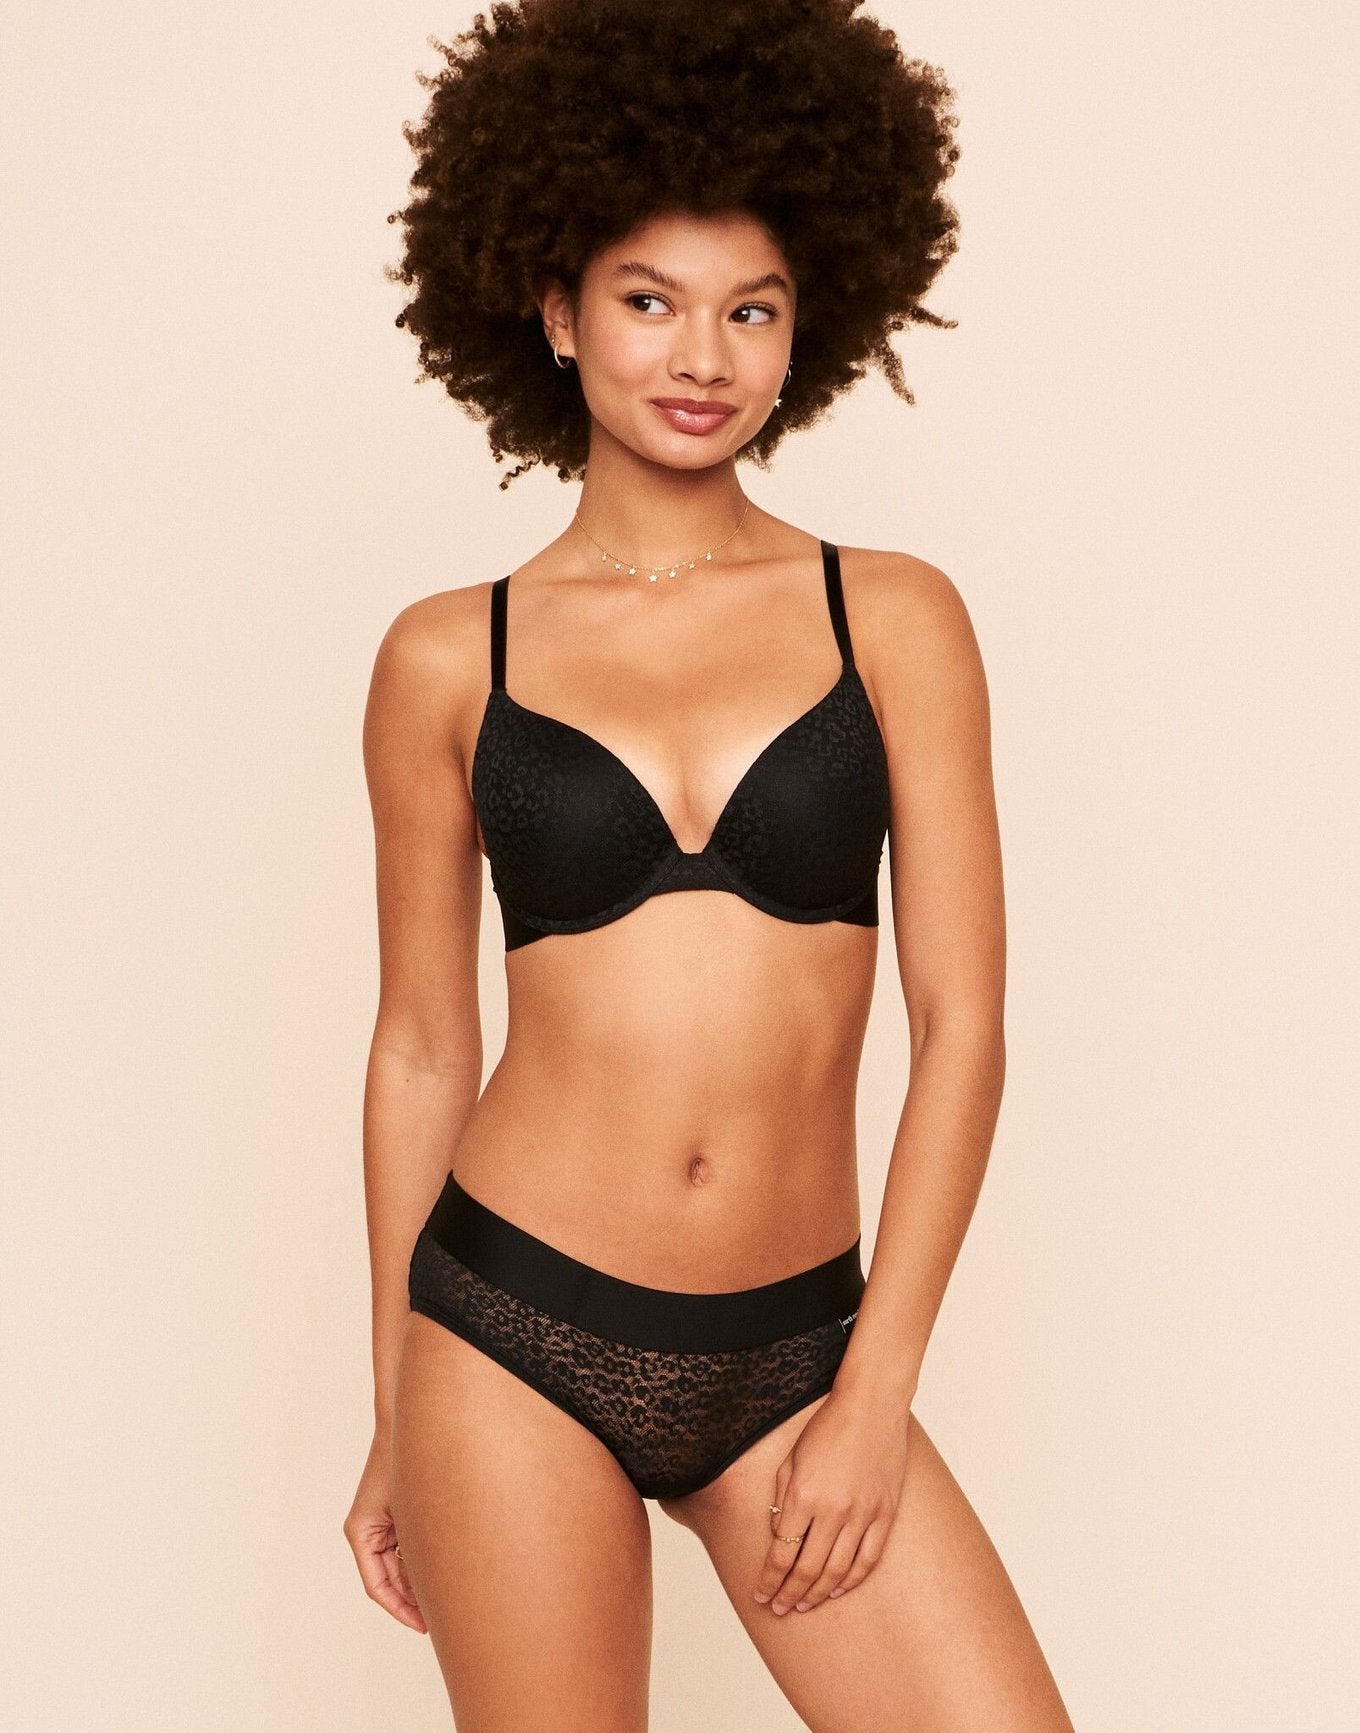 Earth Republic Kendall Lace Plunge Push Up Bra Lace Push-up Bra in color Jet Black and shape plunge